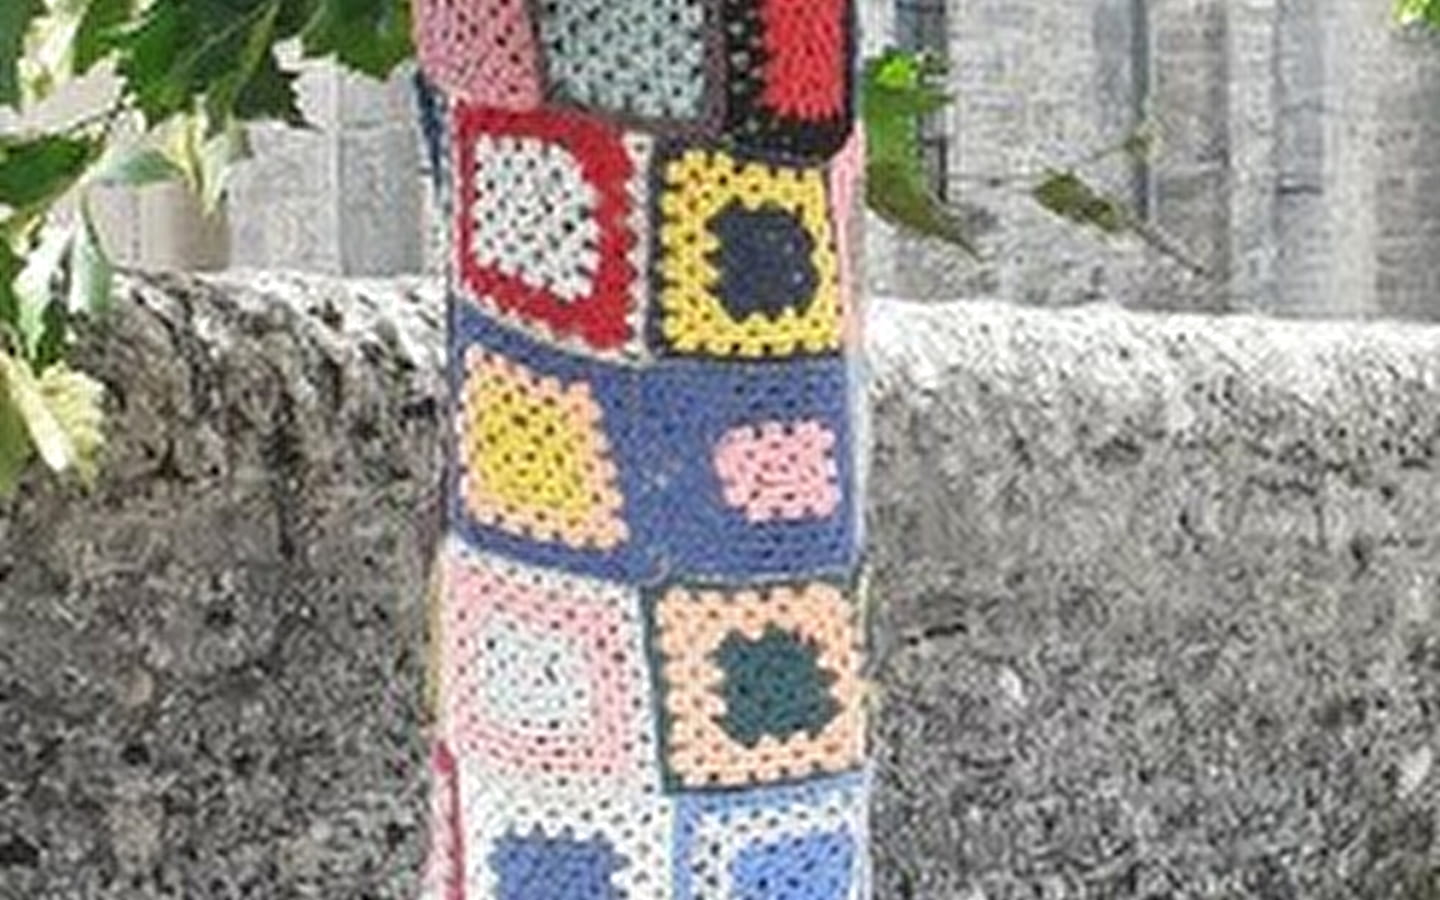 Semaine Bleue - Urban knitting for 11 to 99 year-olds